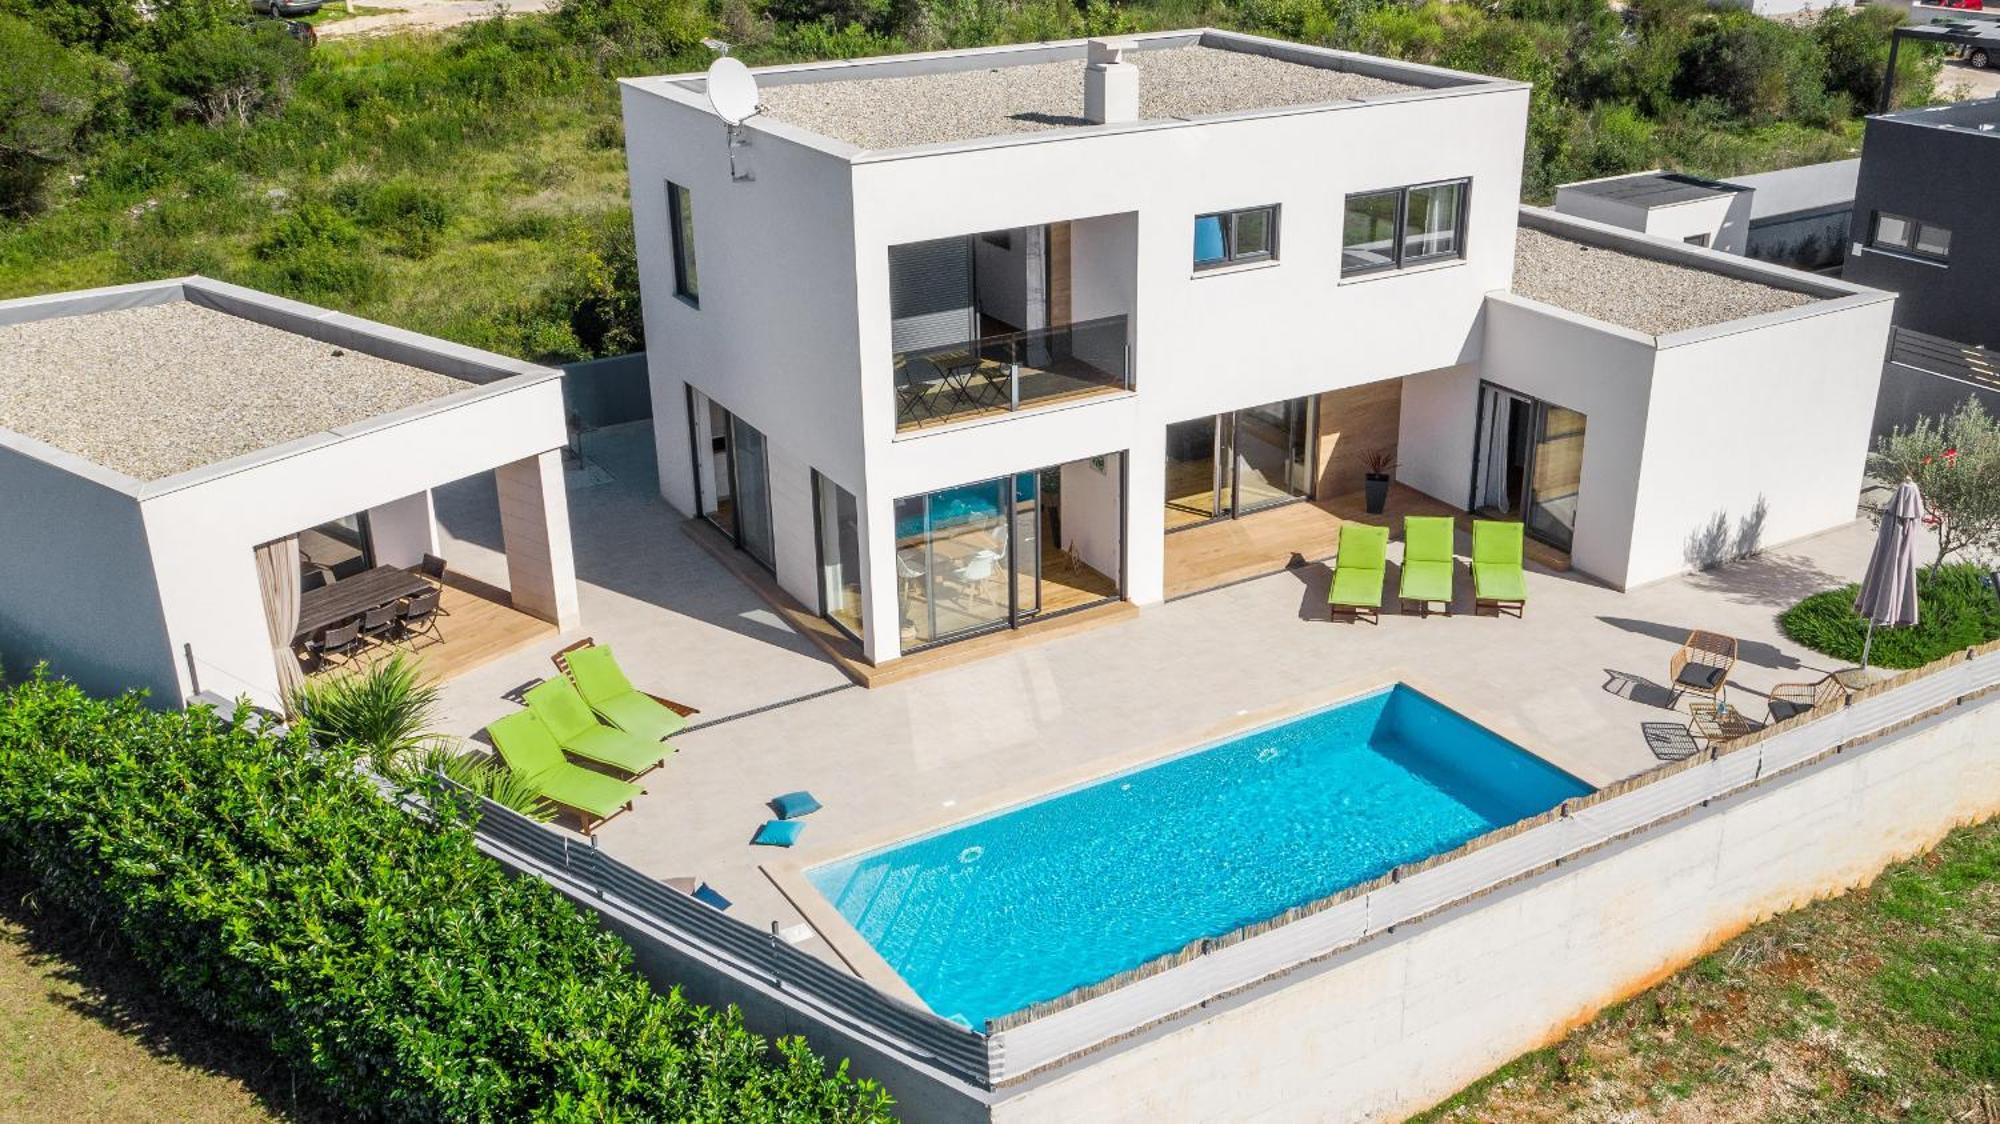 Modern Villa Ol&Ju For 9 Persons In Pula Only 1.5 Km From The Beach With Pool Heating 外观 照片